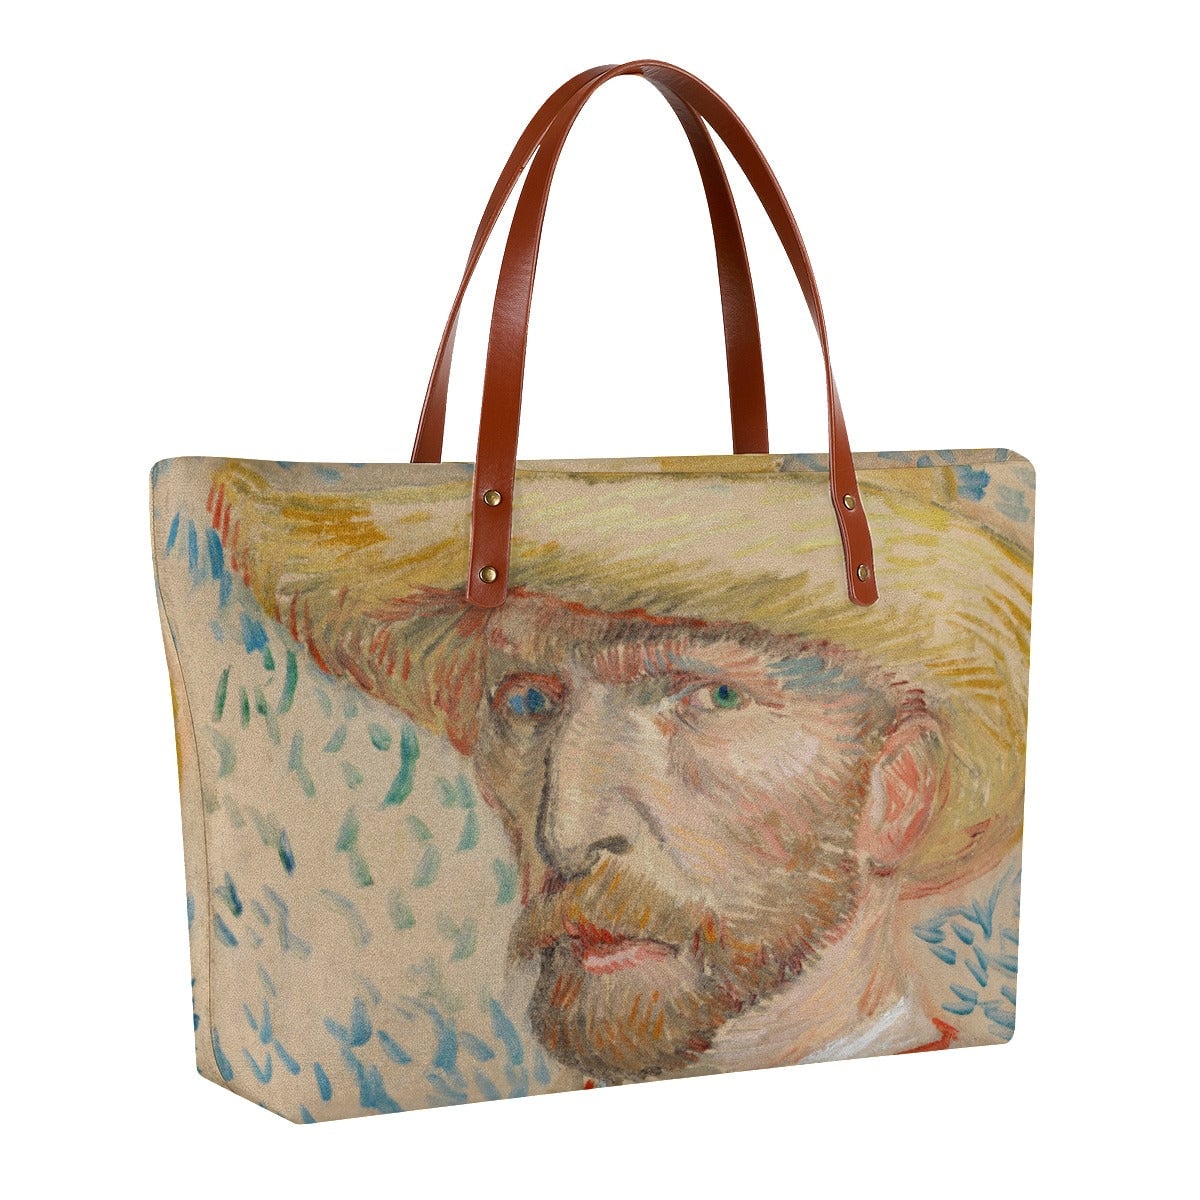 Self-Portrait with a Straw Hat by Vincent van Gogh Tote Bag